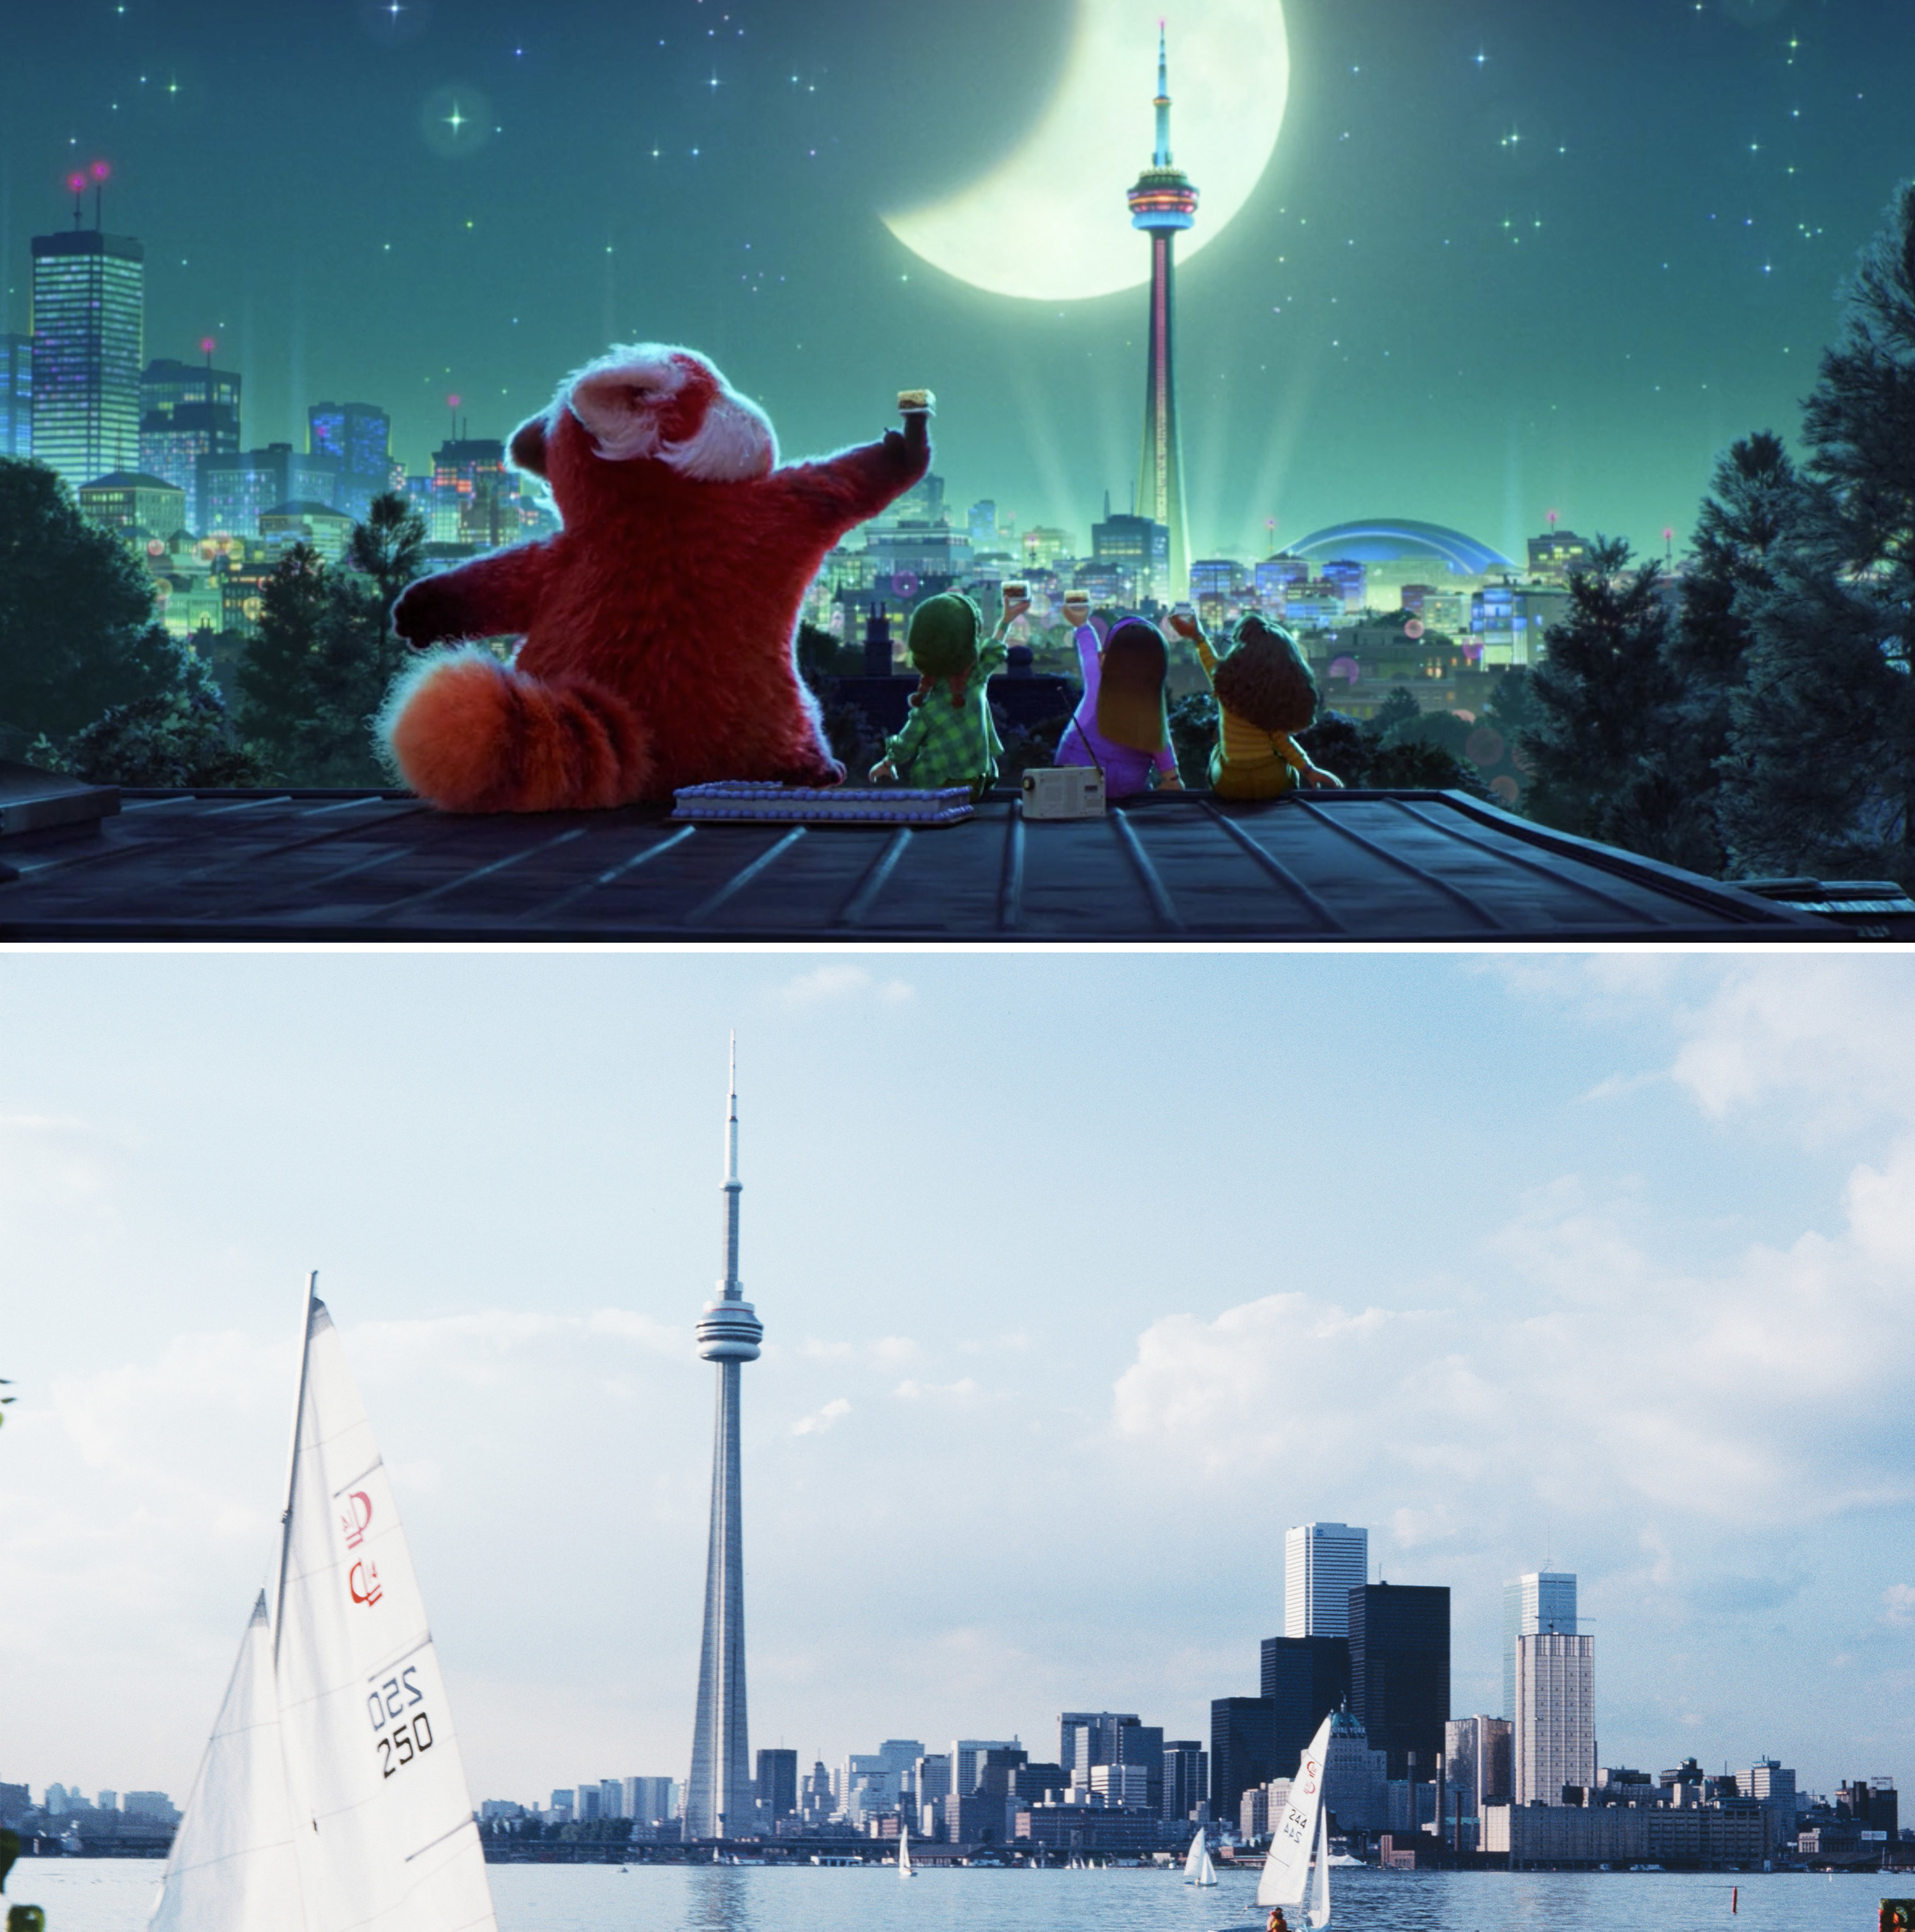 The CN tower in the move vs real life